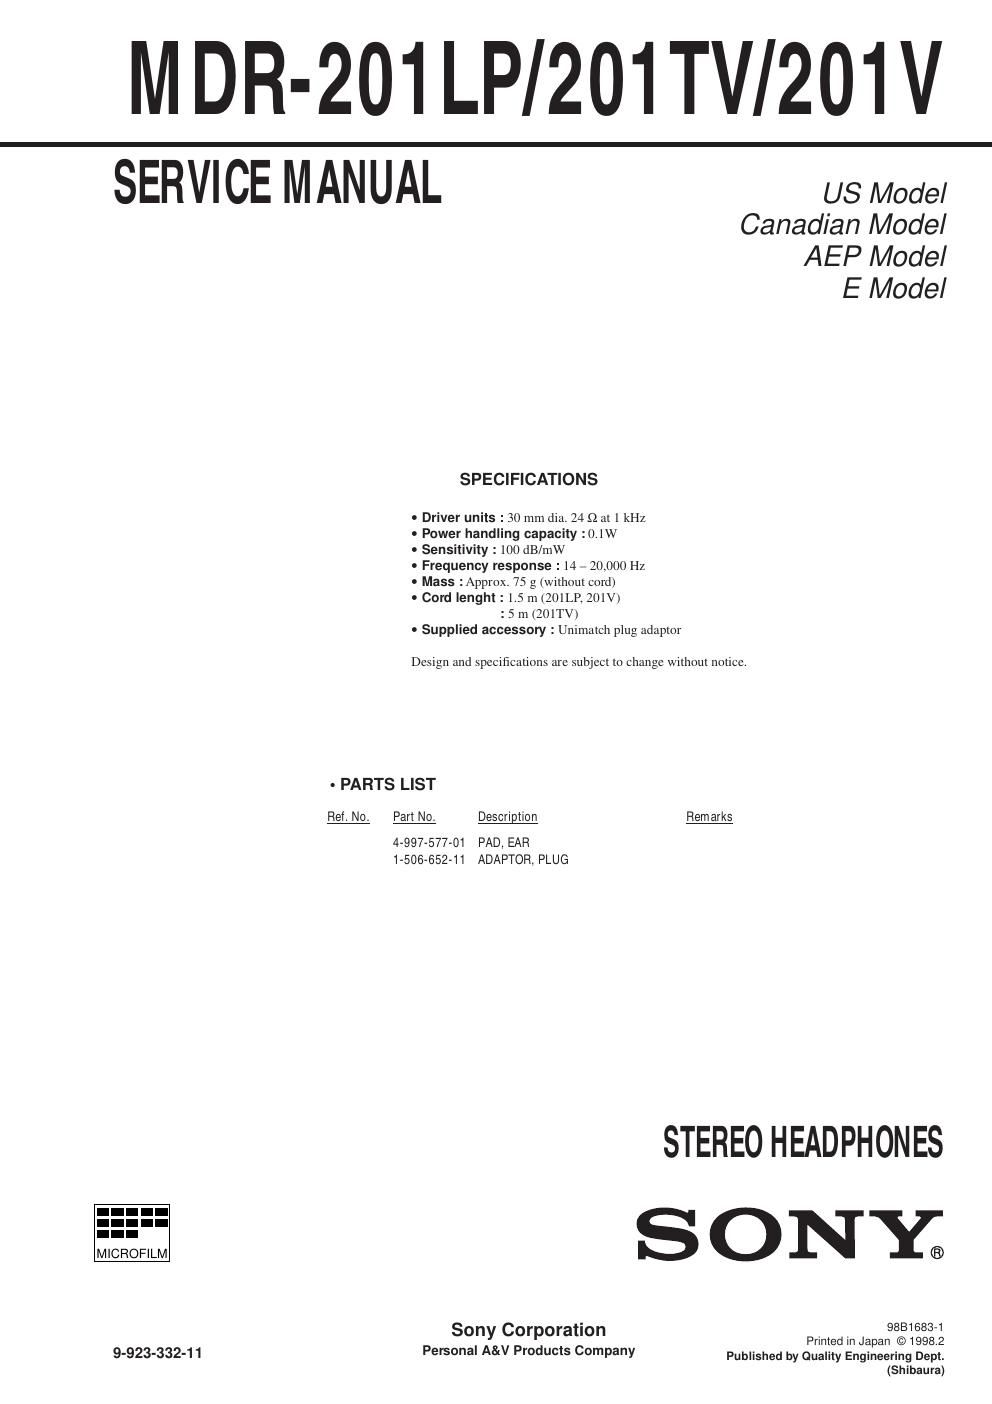 sony mdr 201 lp service manual